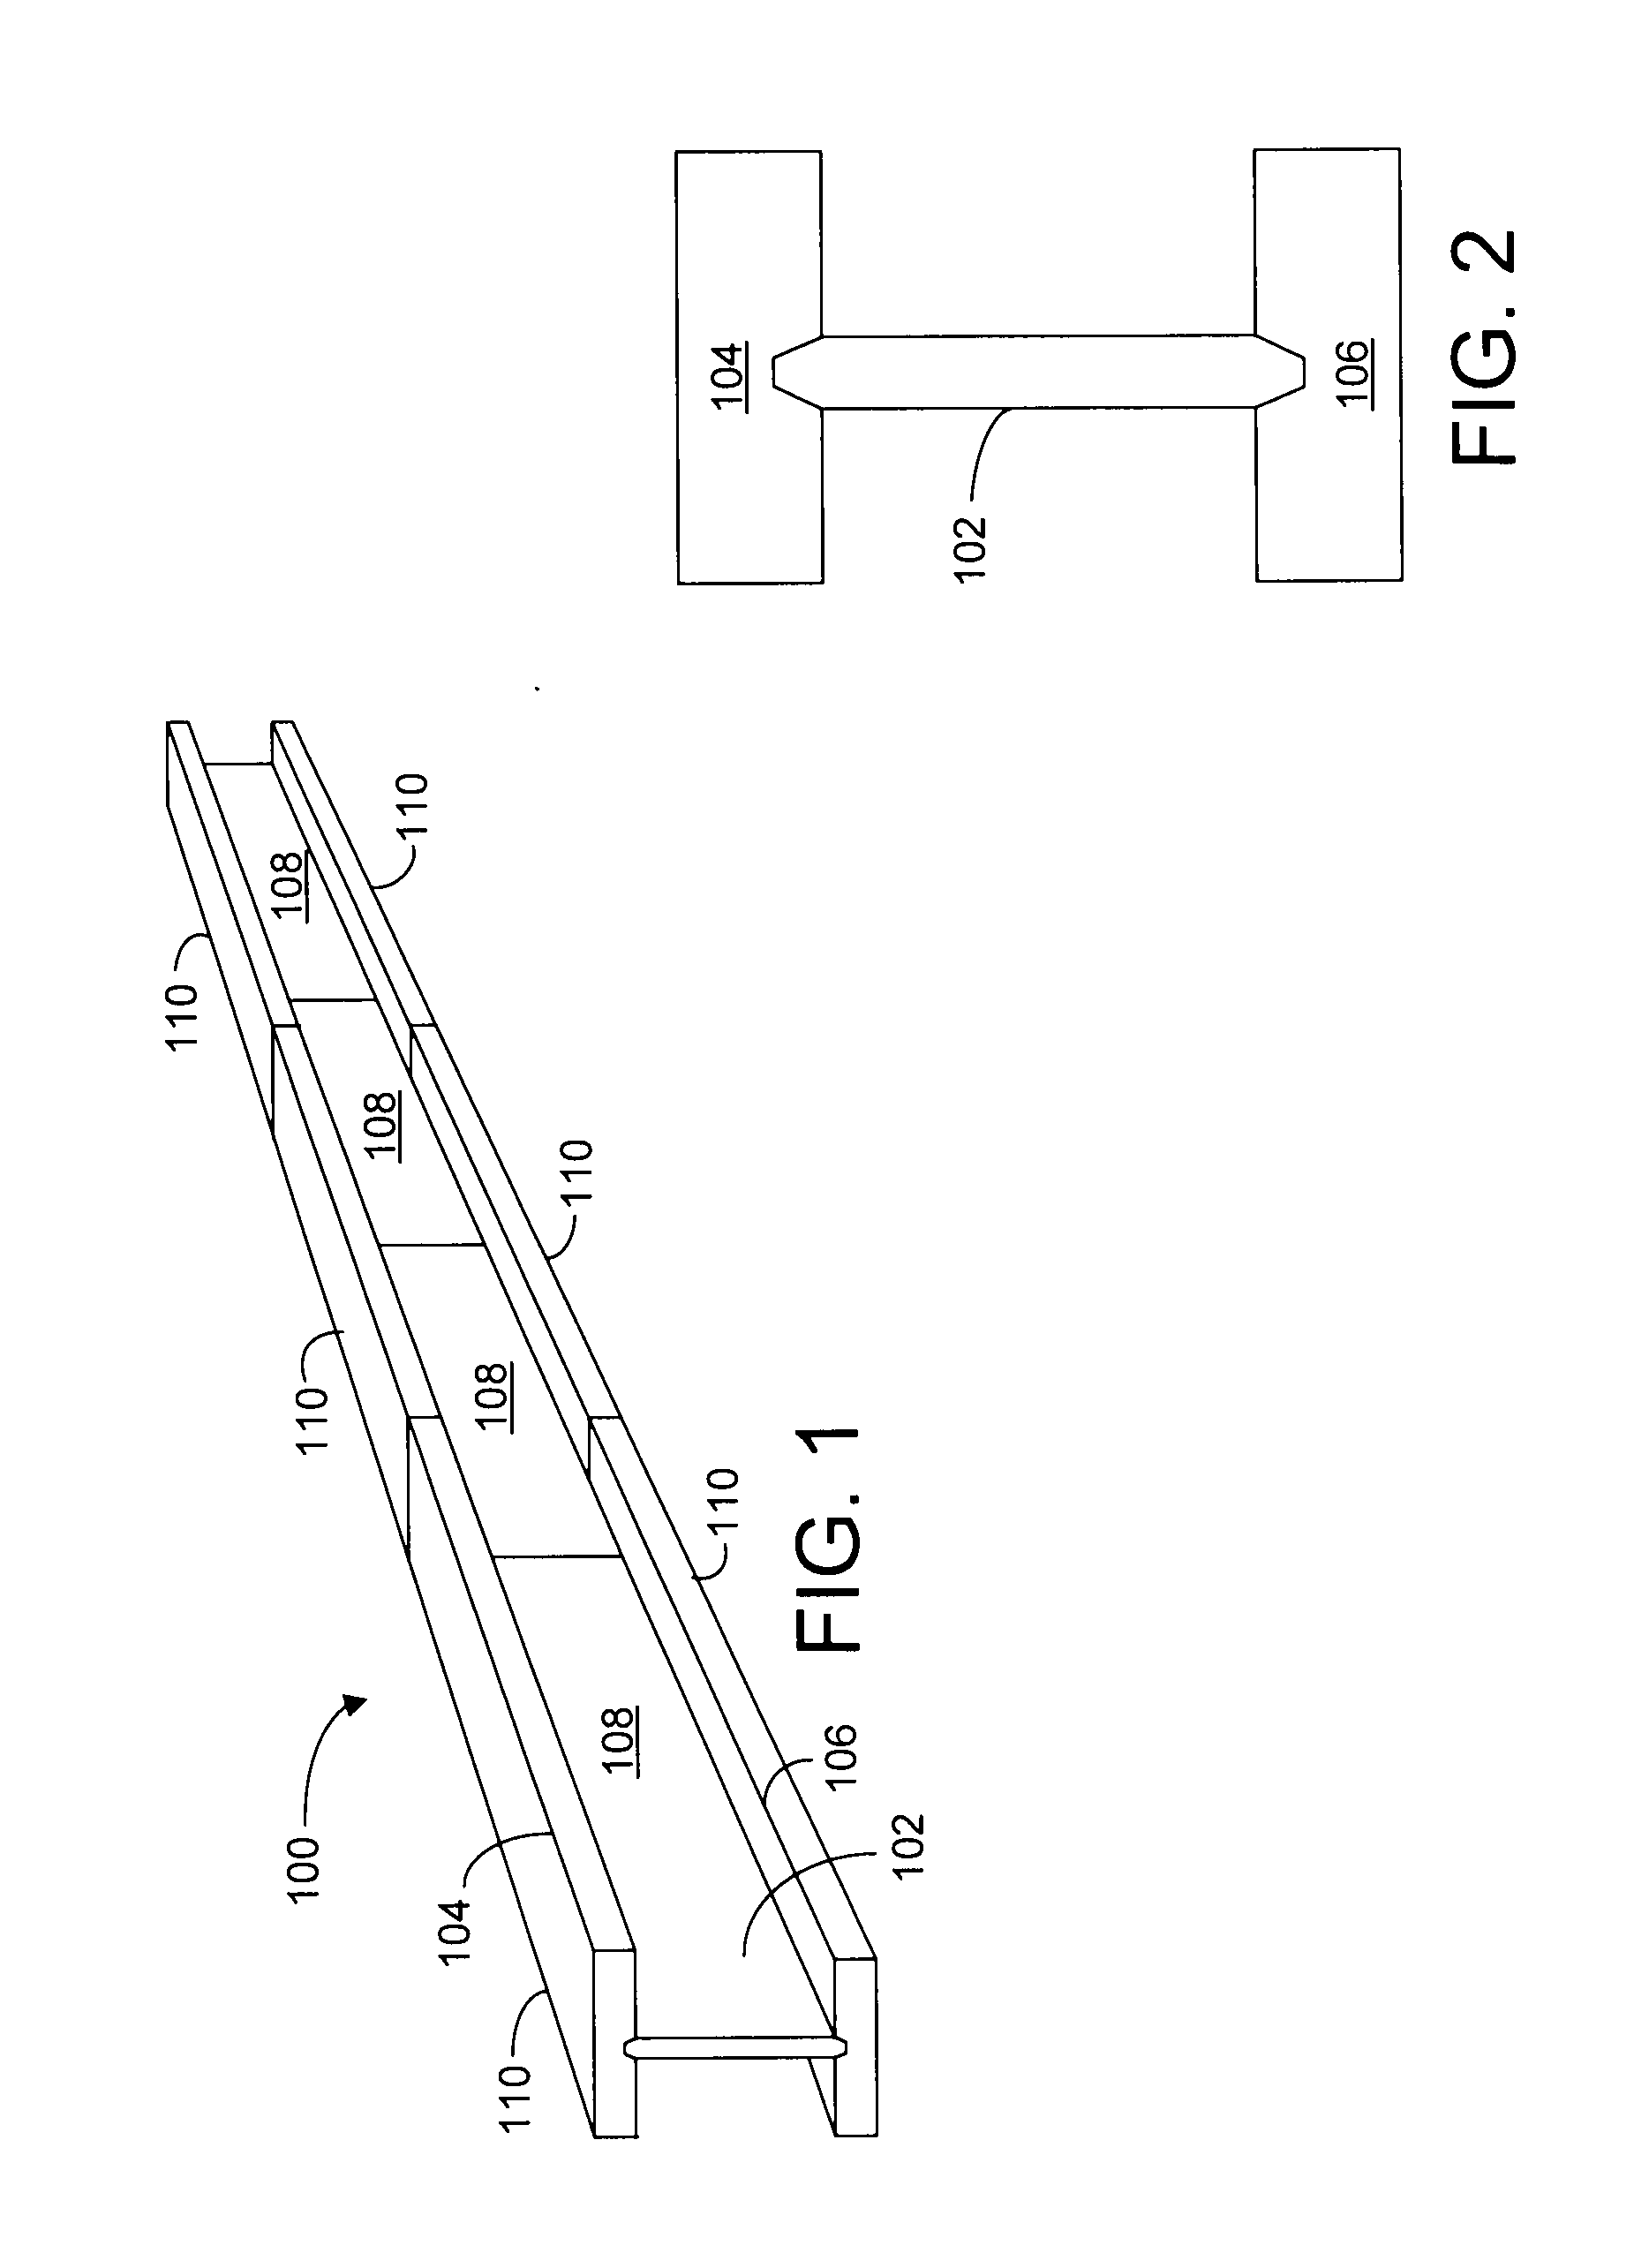 Preservative-treated i-joist and components thereof